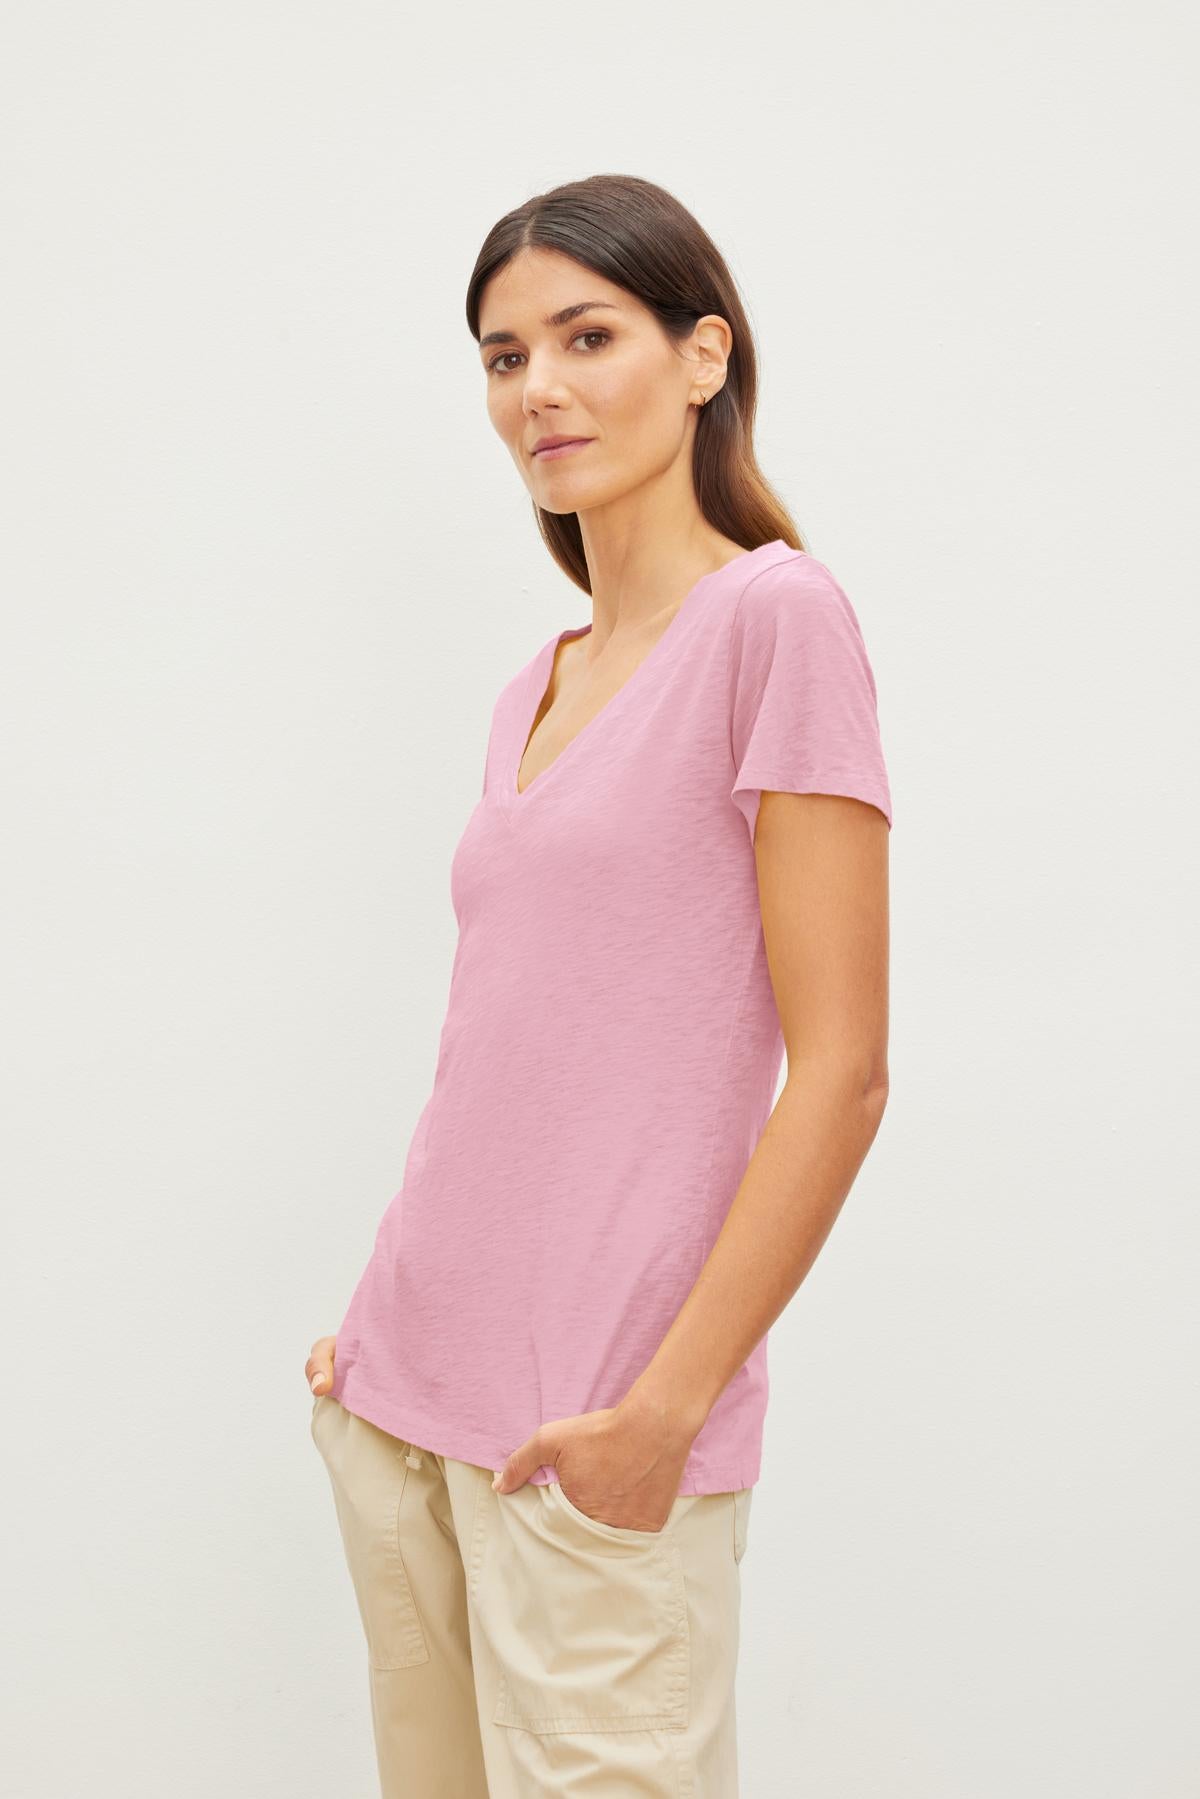   A person wearing a light pink Velvet by Graham & Spencer LILITH TEE and beige pants stands against a plain white background with hands in pockets. 